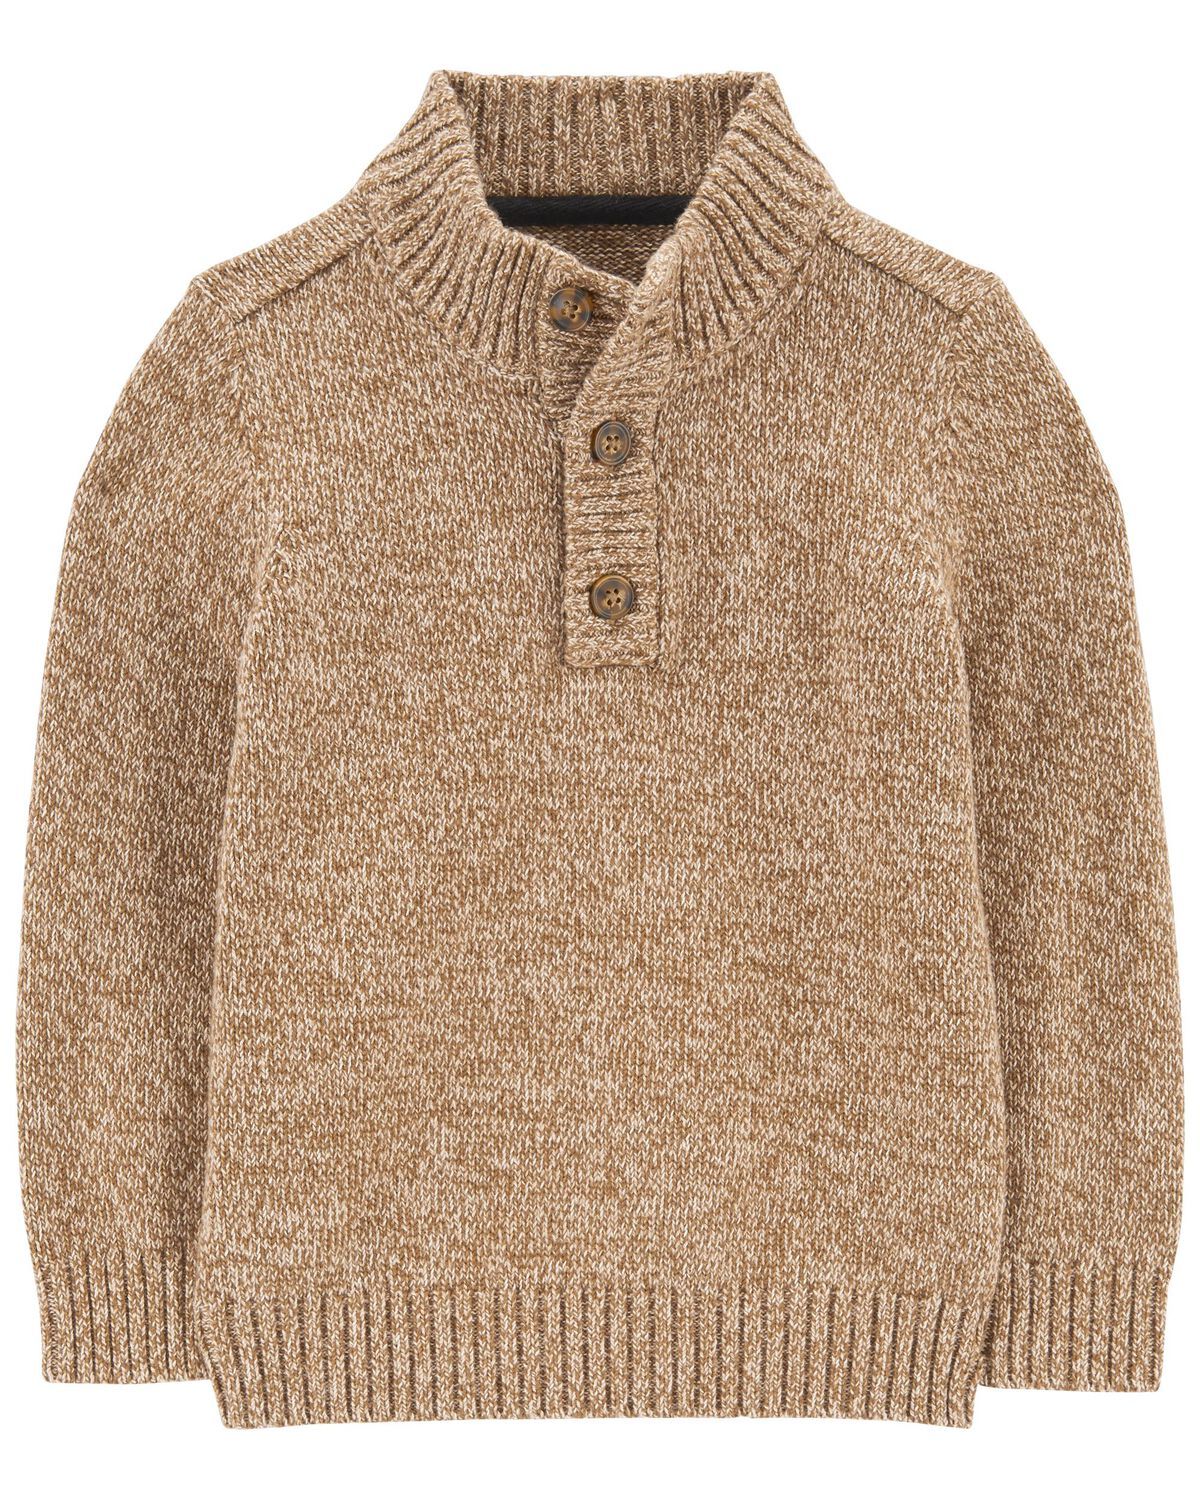 Brown Toddler Pullover Cotton Sweater | carters.com | Carter's